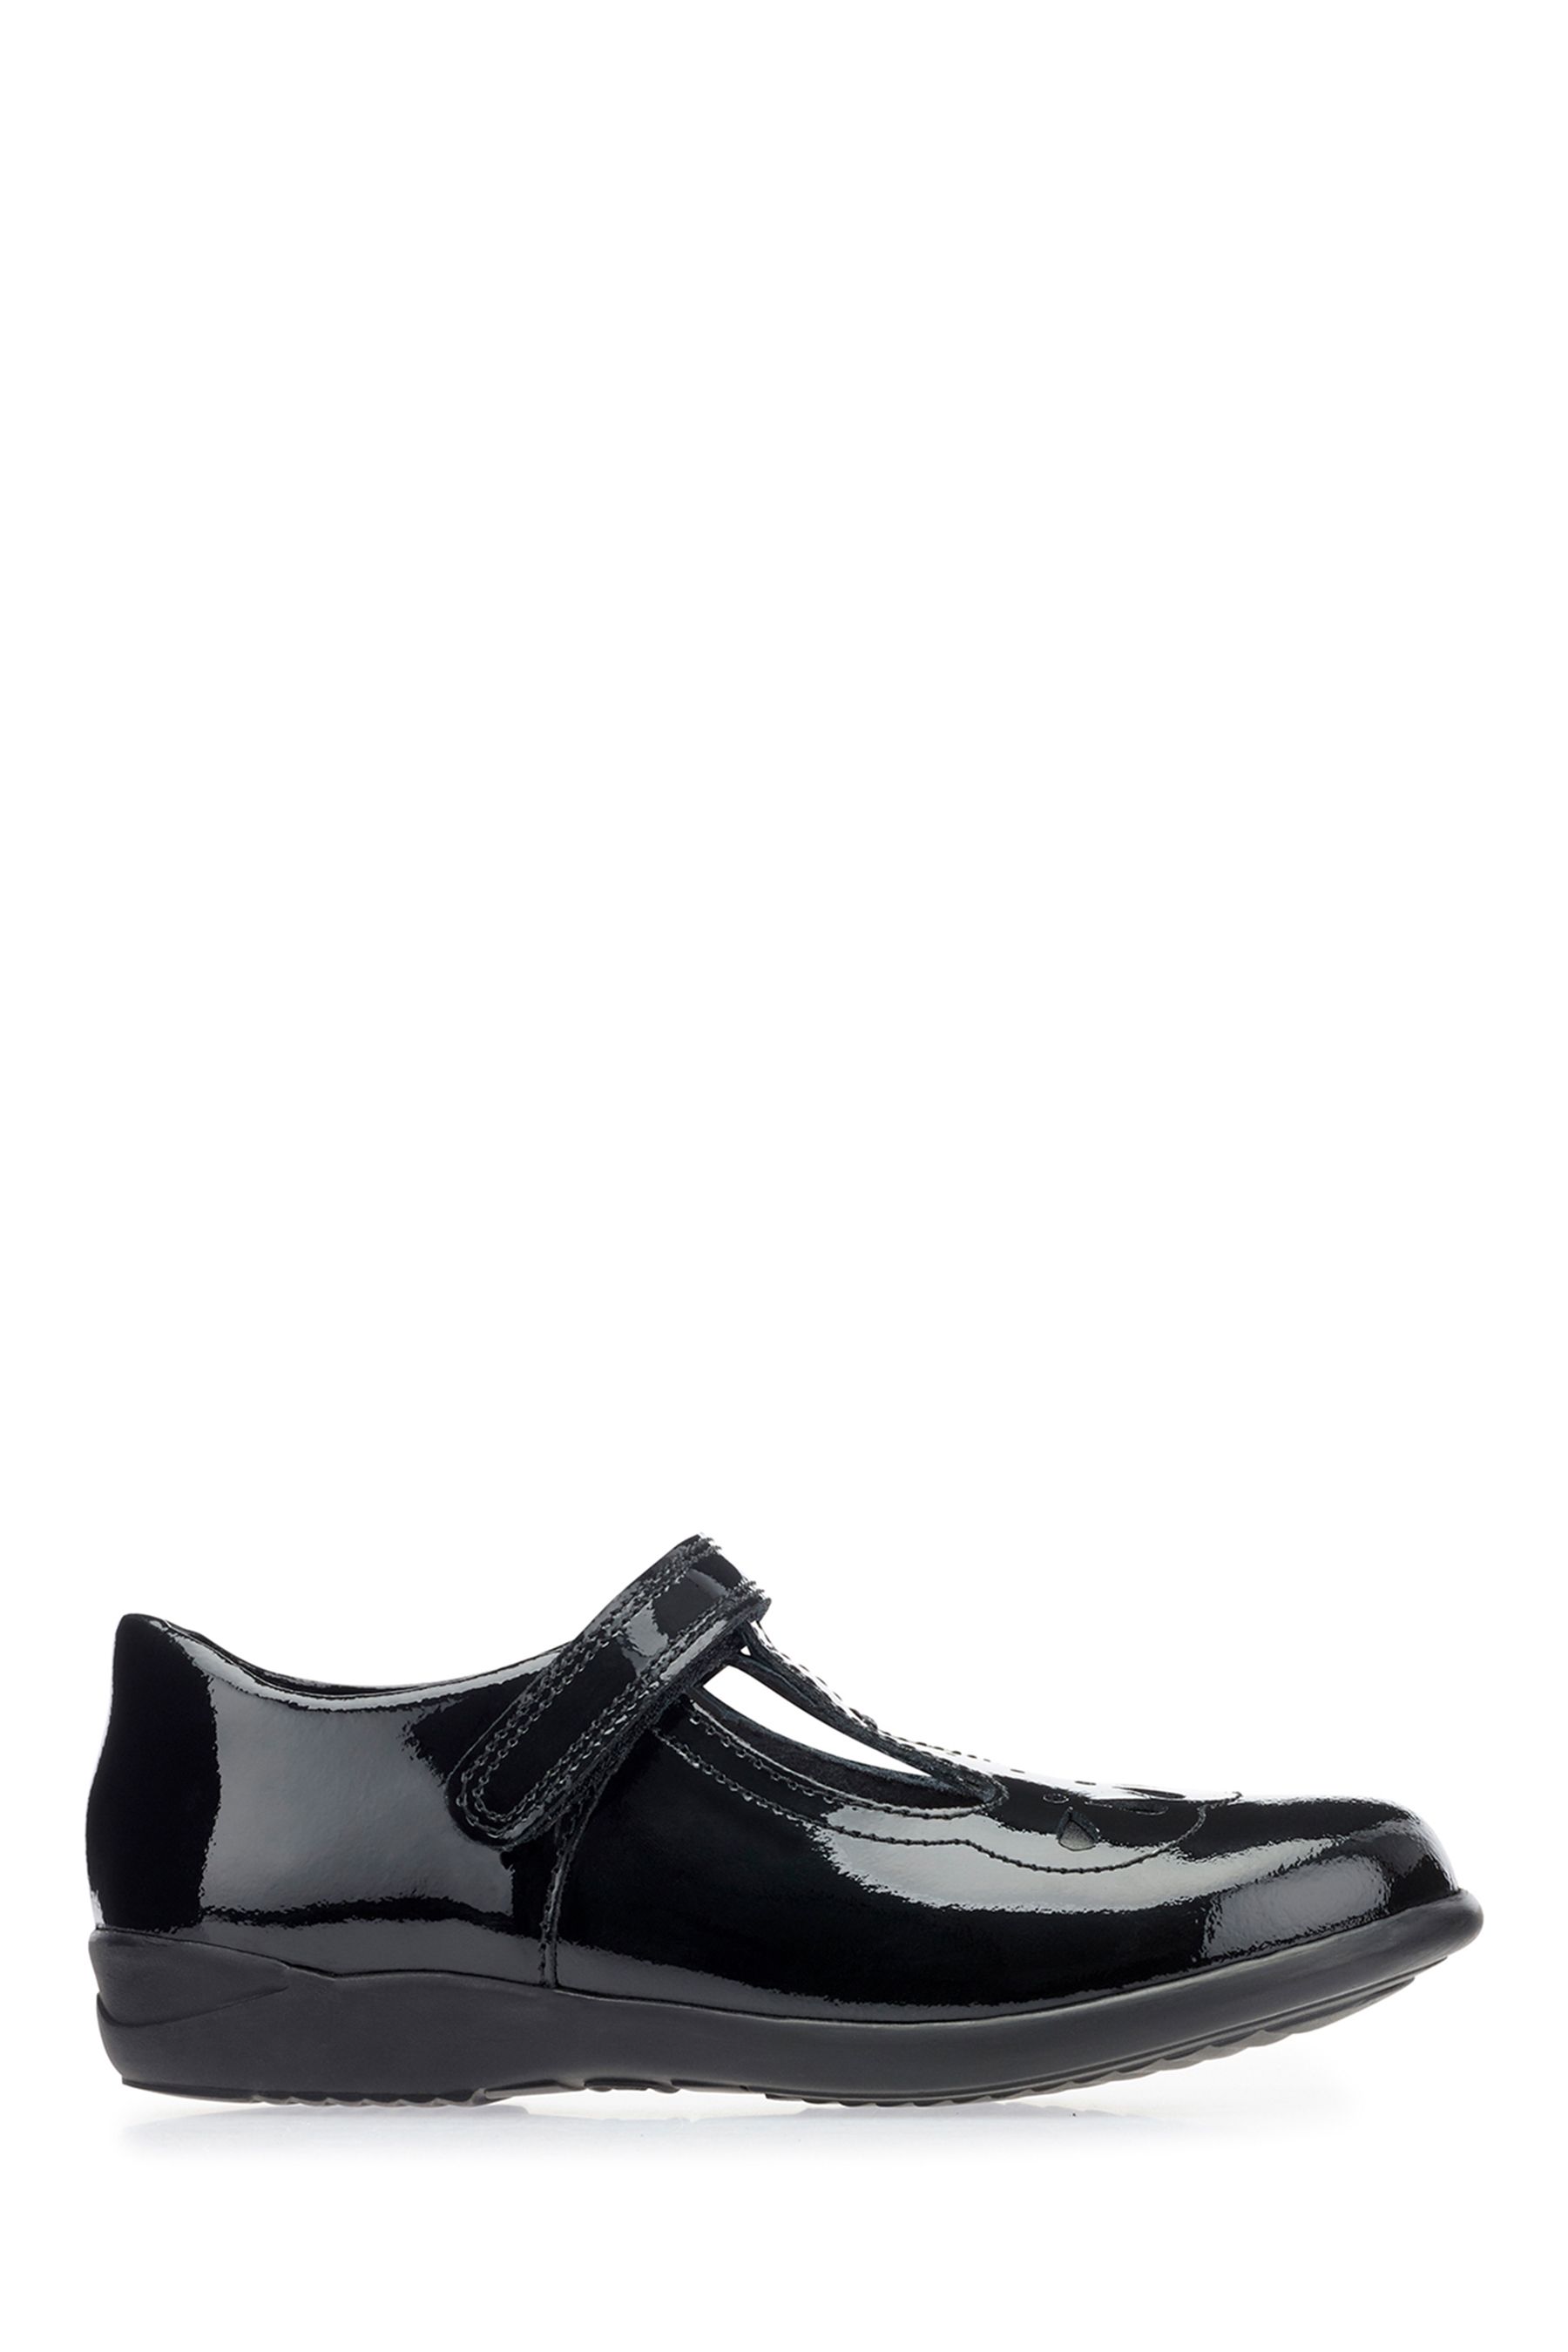 Buy Start-Rite Poppy Black Patent Leather T Bar School Shoes from the ...